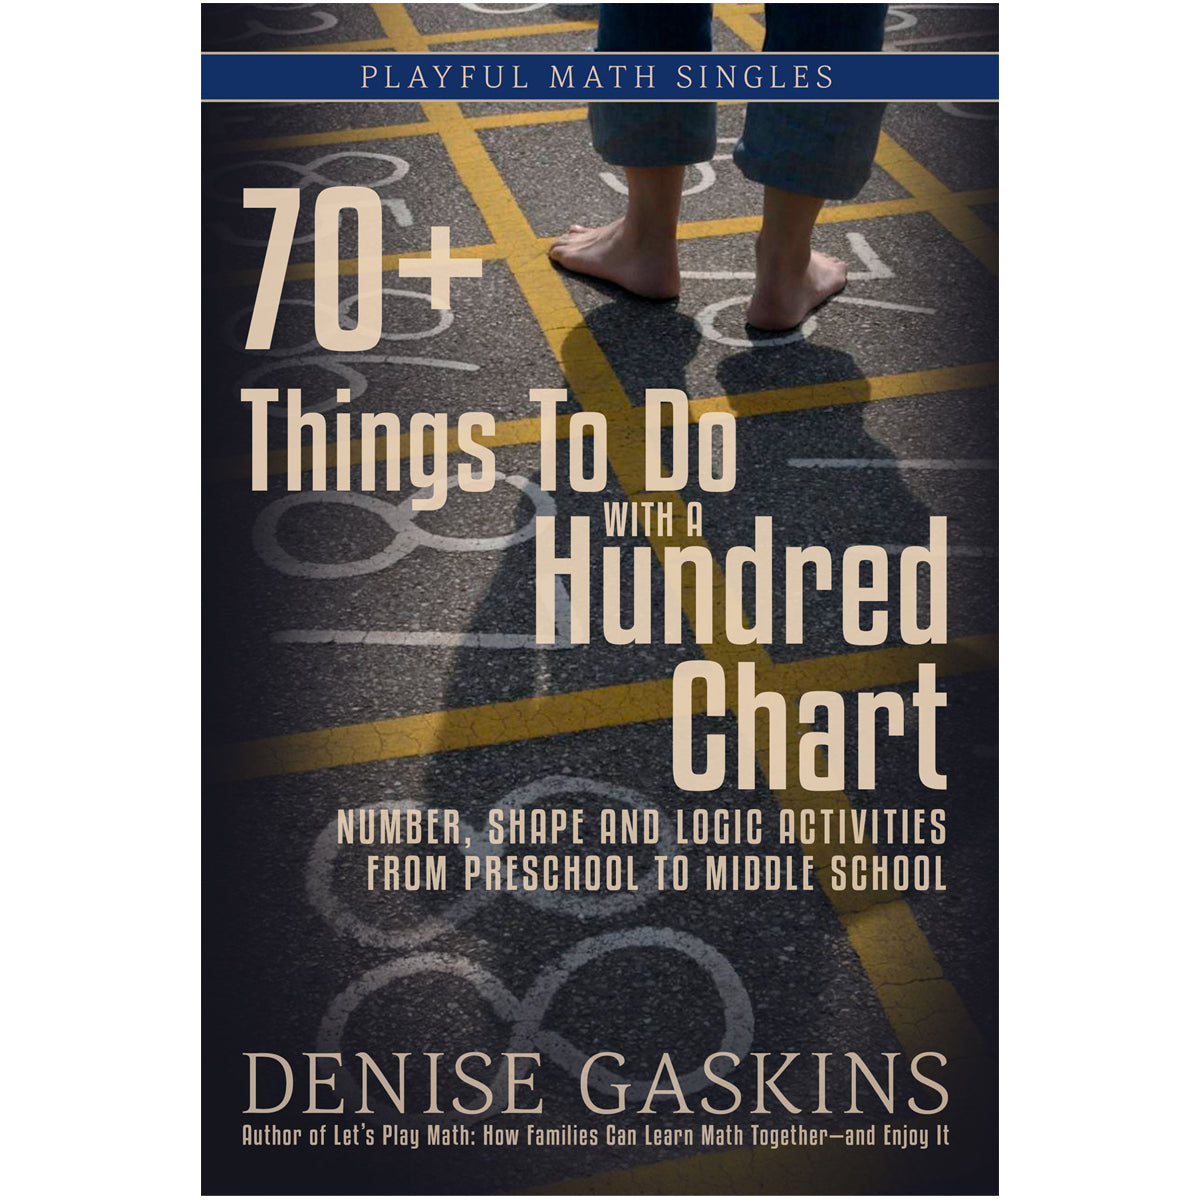 Hundred Chart math activities by Denise Gaskins